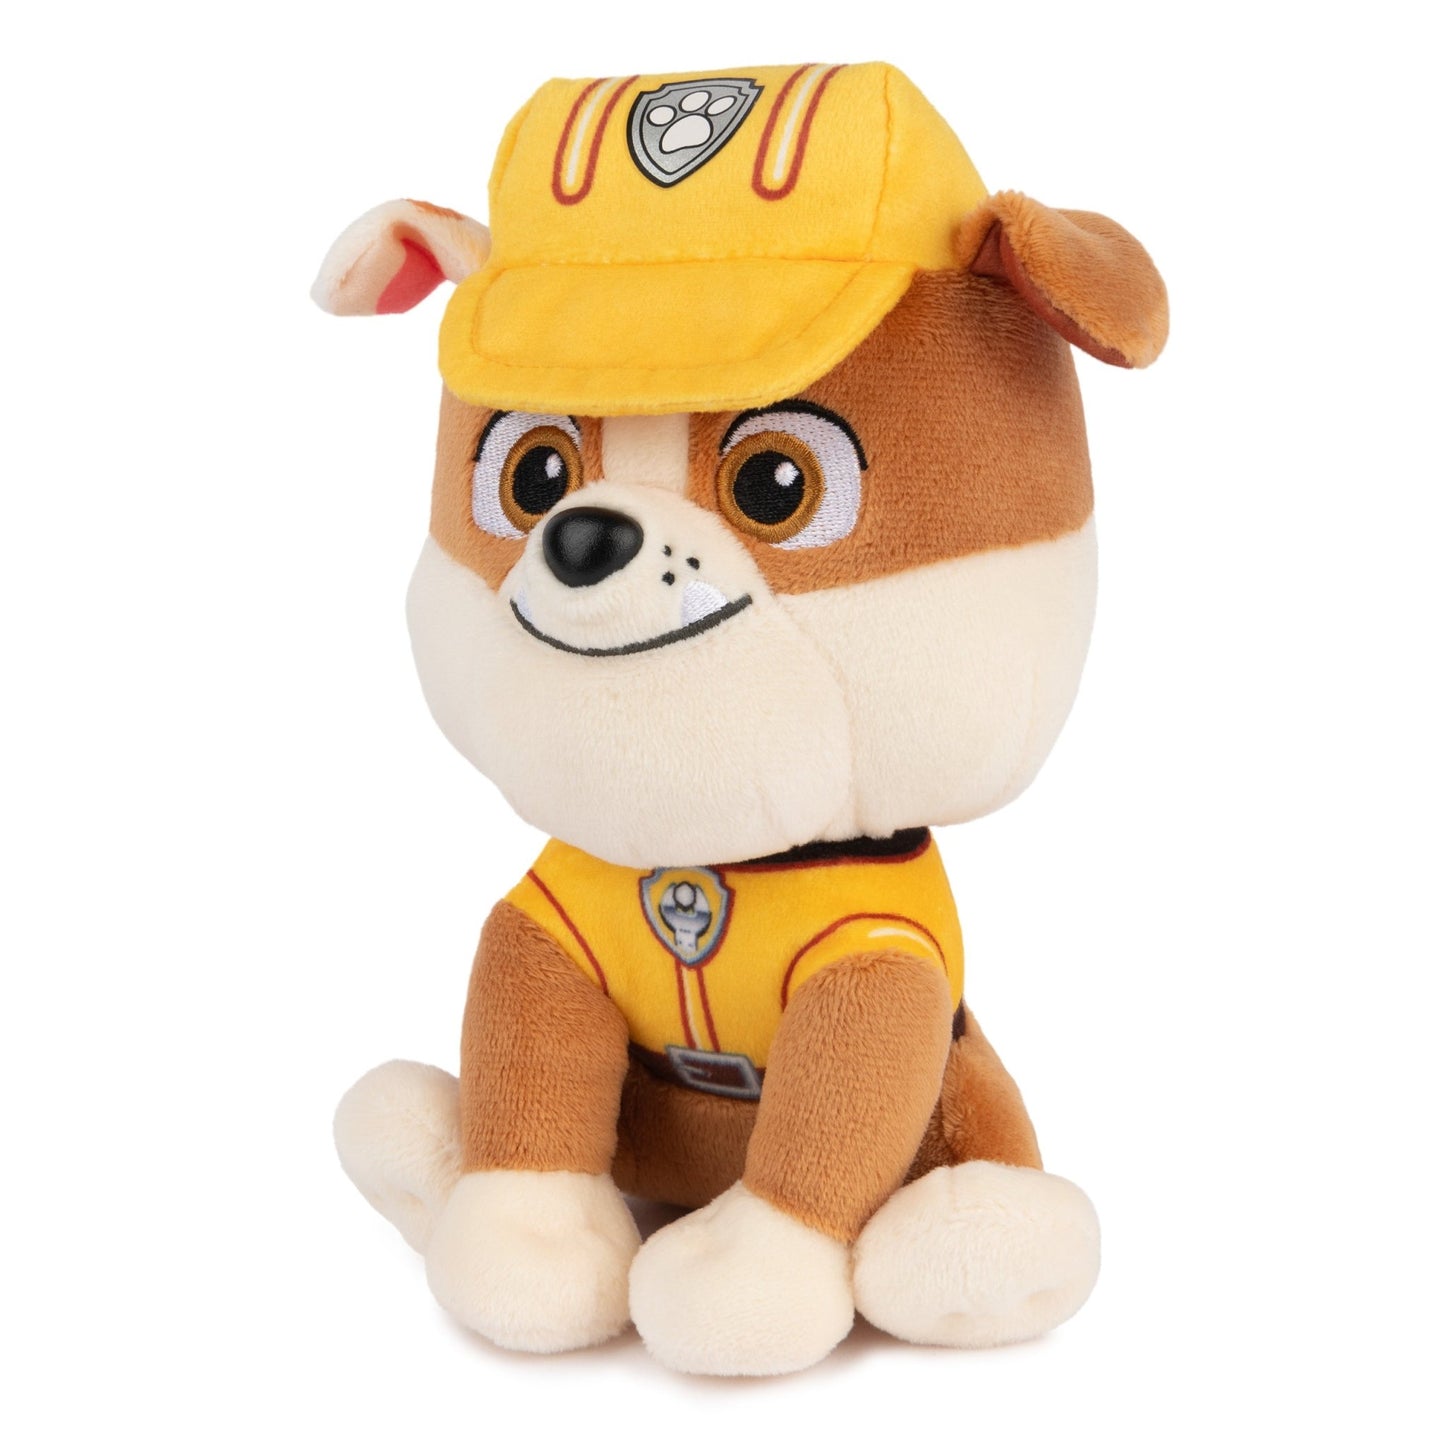 GUND Official PAW Patrol Rubble in Signature Construction Uniform Plush Toy, Stuffed Animal for Ages 1 and Up, 6" - Paramount Shop